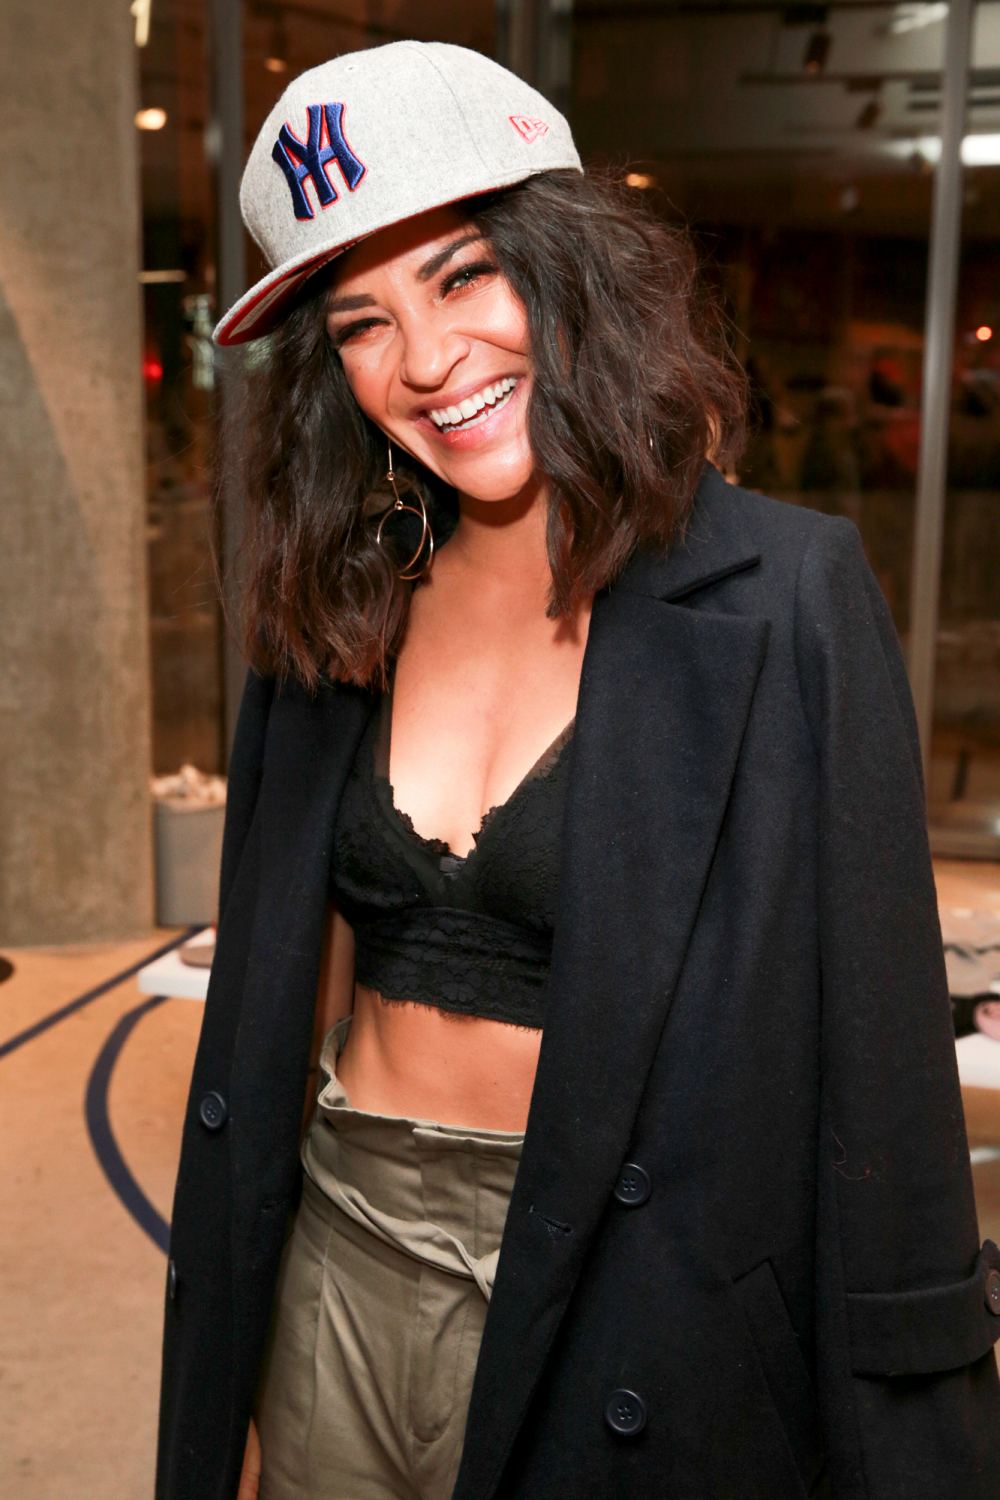 Jessica Szohr attends the New Era x Fred Segal Pop-Up Launch Event in West Hollywood, California.